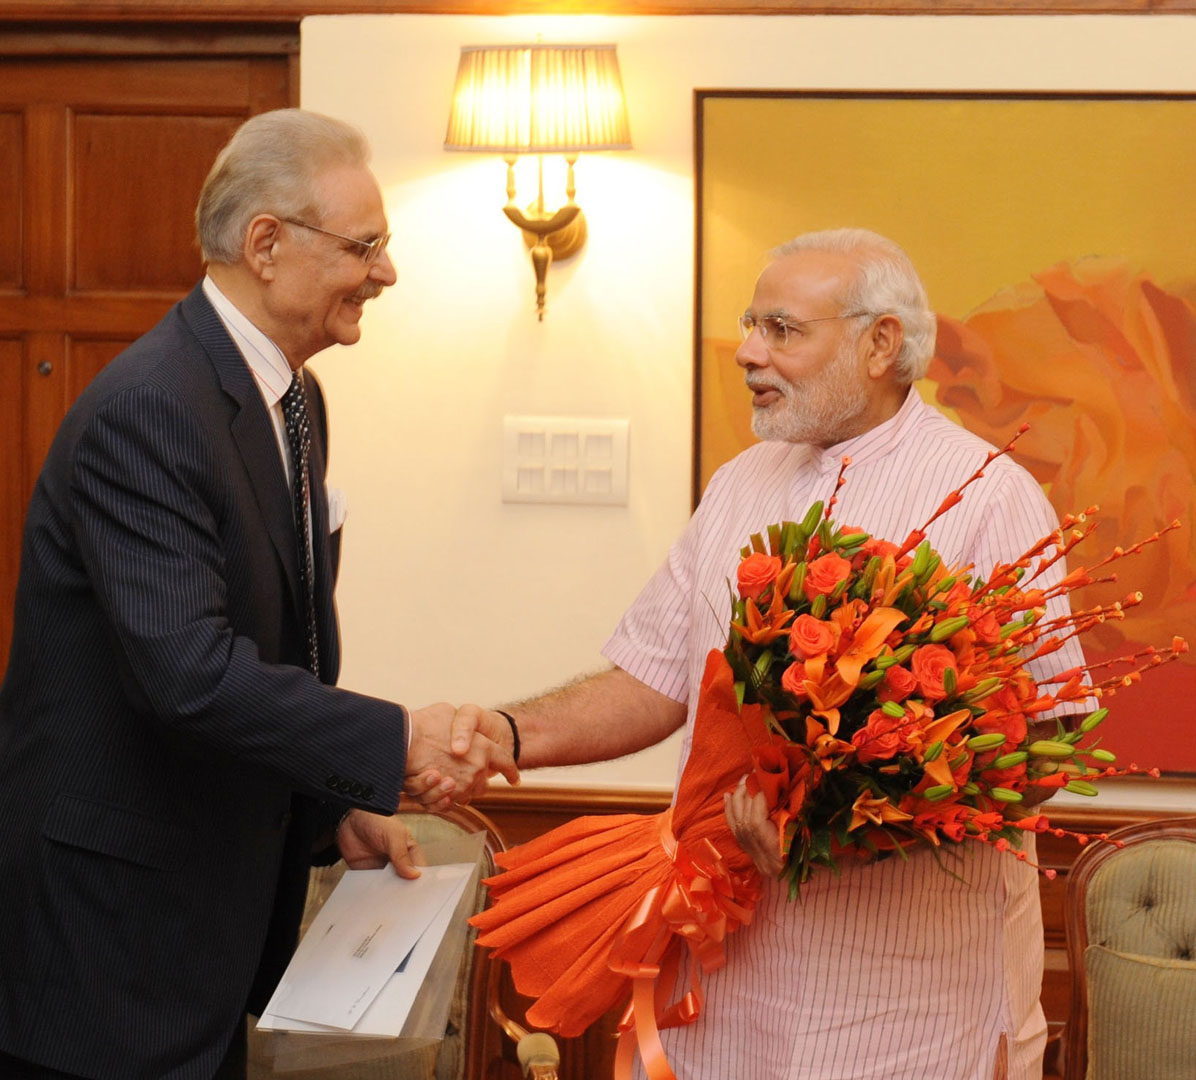 The Chairman, ITC, Shri Y.C. Deveshwar, calls on the Prime Minister, Shri Narendra Modi, and handed over a cheque for Rs. 10 crore for the Prime Minister's National Relief Fund. The employees of ITC have also contributed a day's salary to the Prime Minister's National Relief Fund, in New Delhi on September 20, 2014.